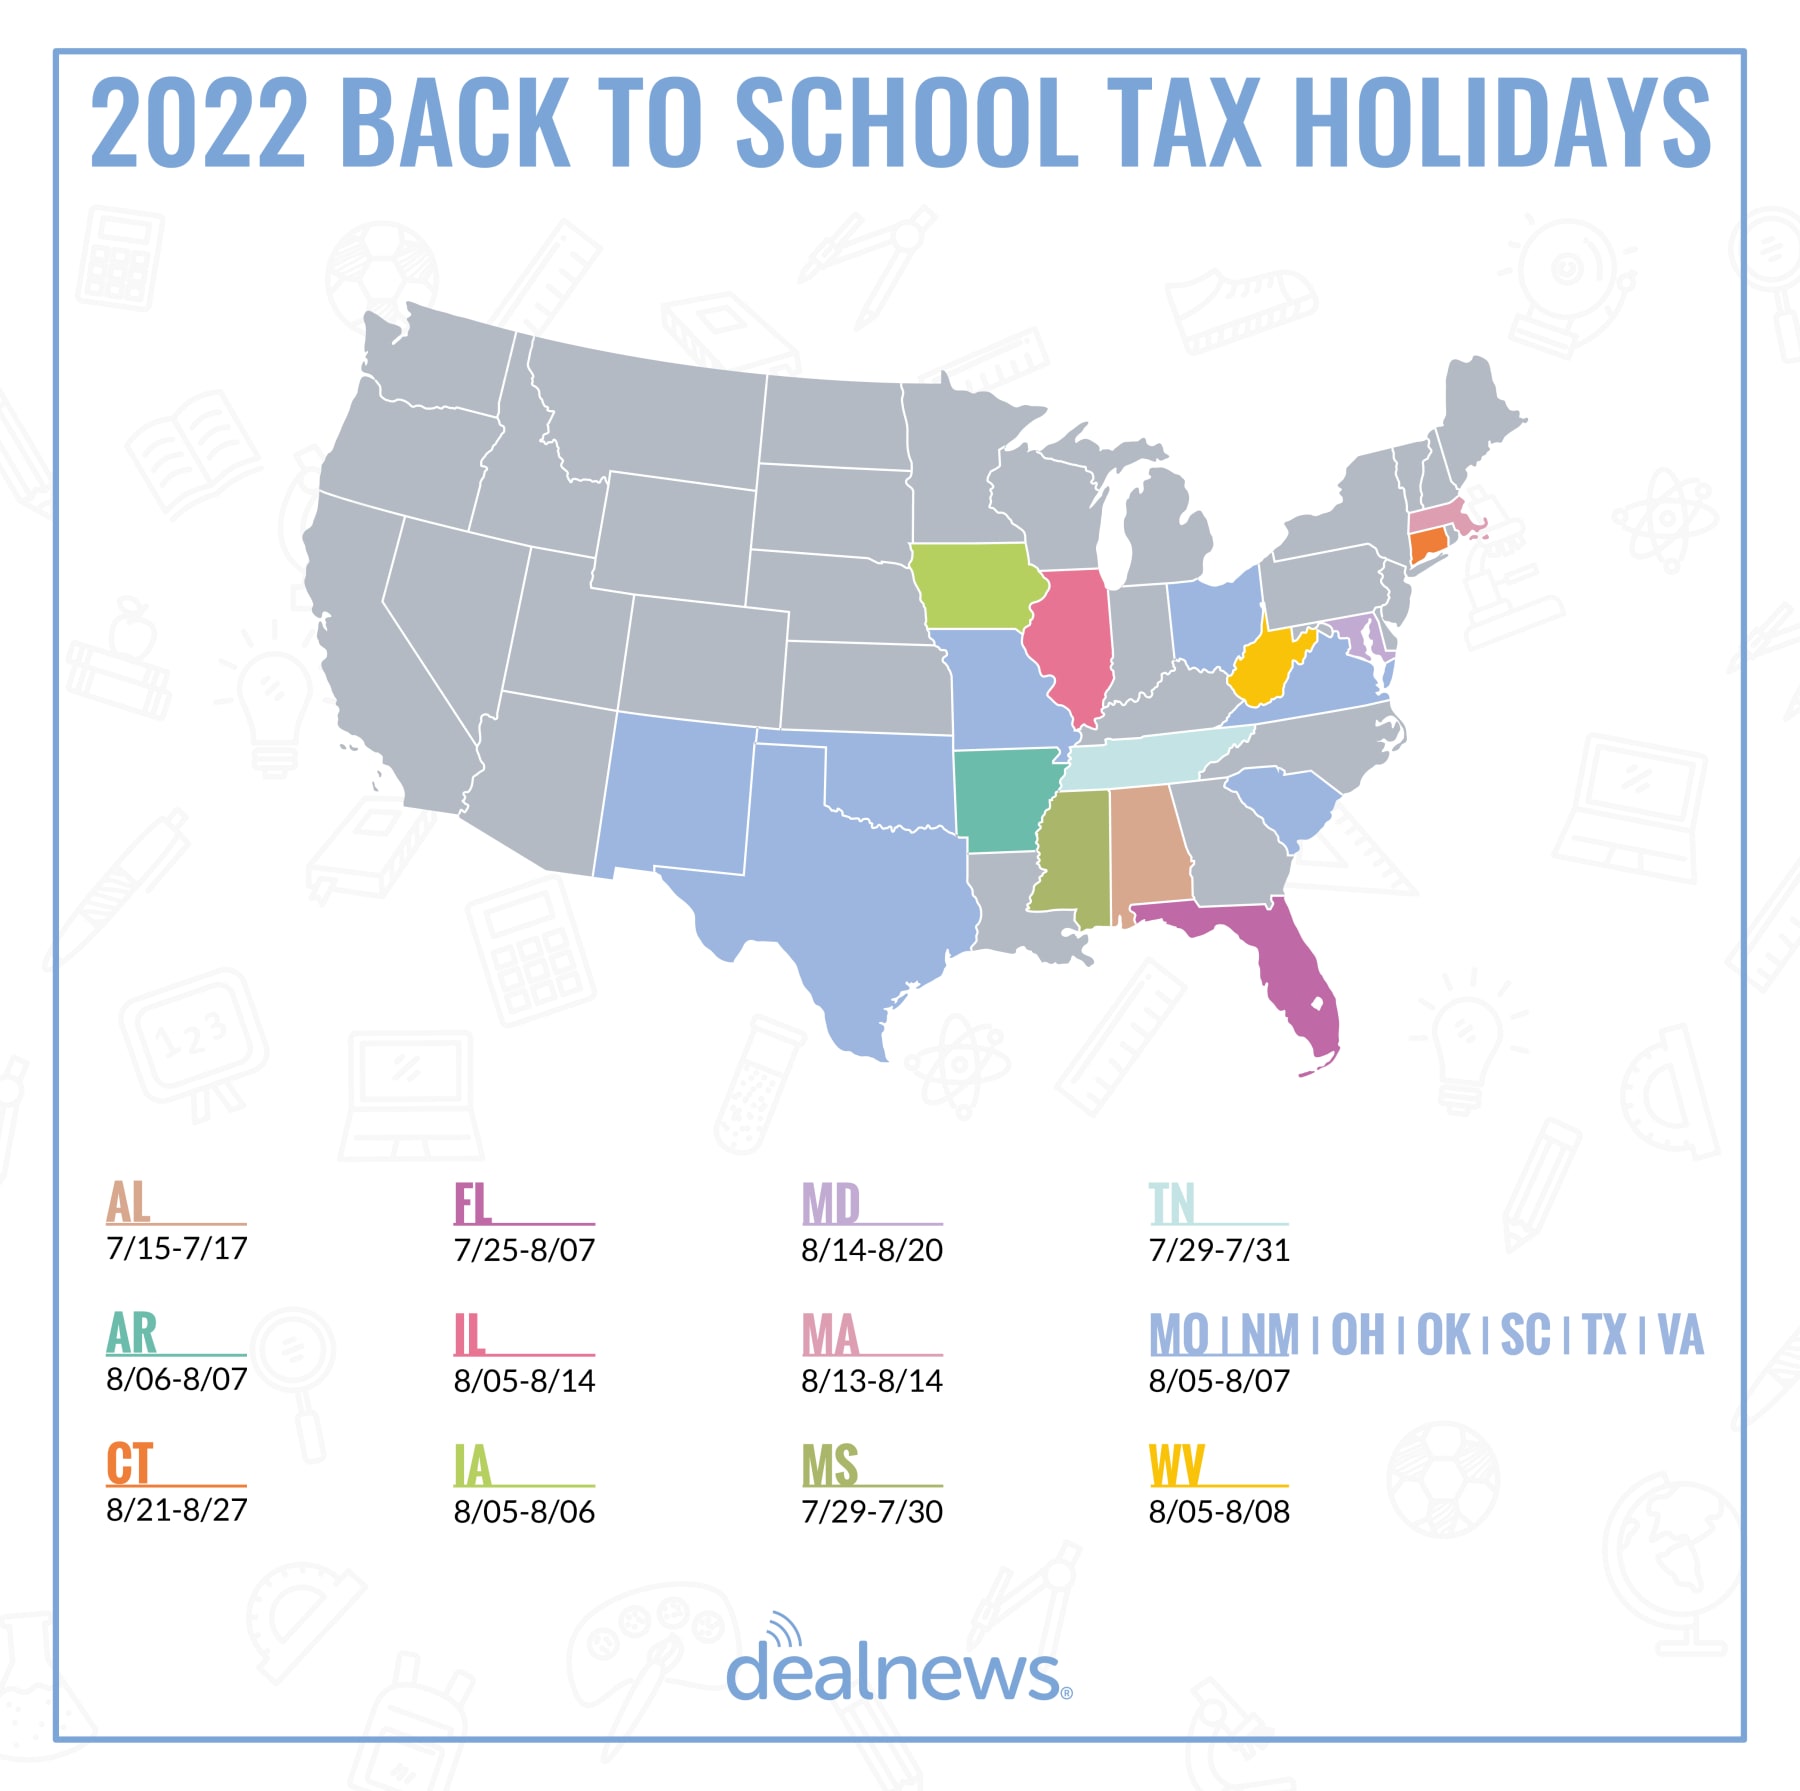 2022 Back to School tax holidays